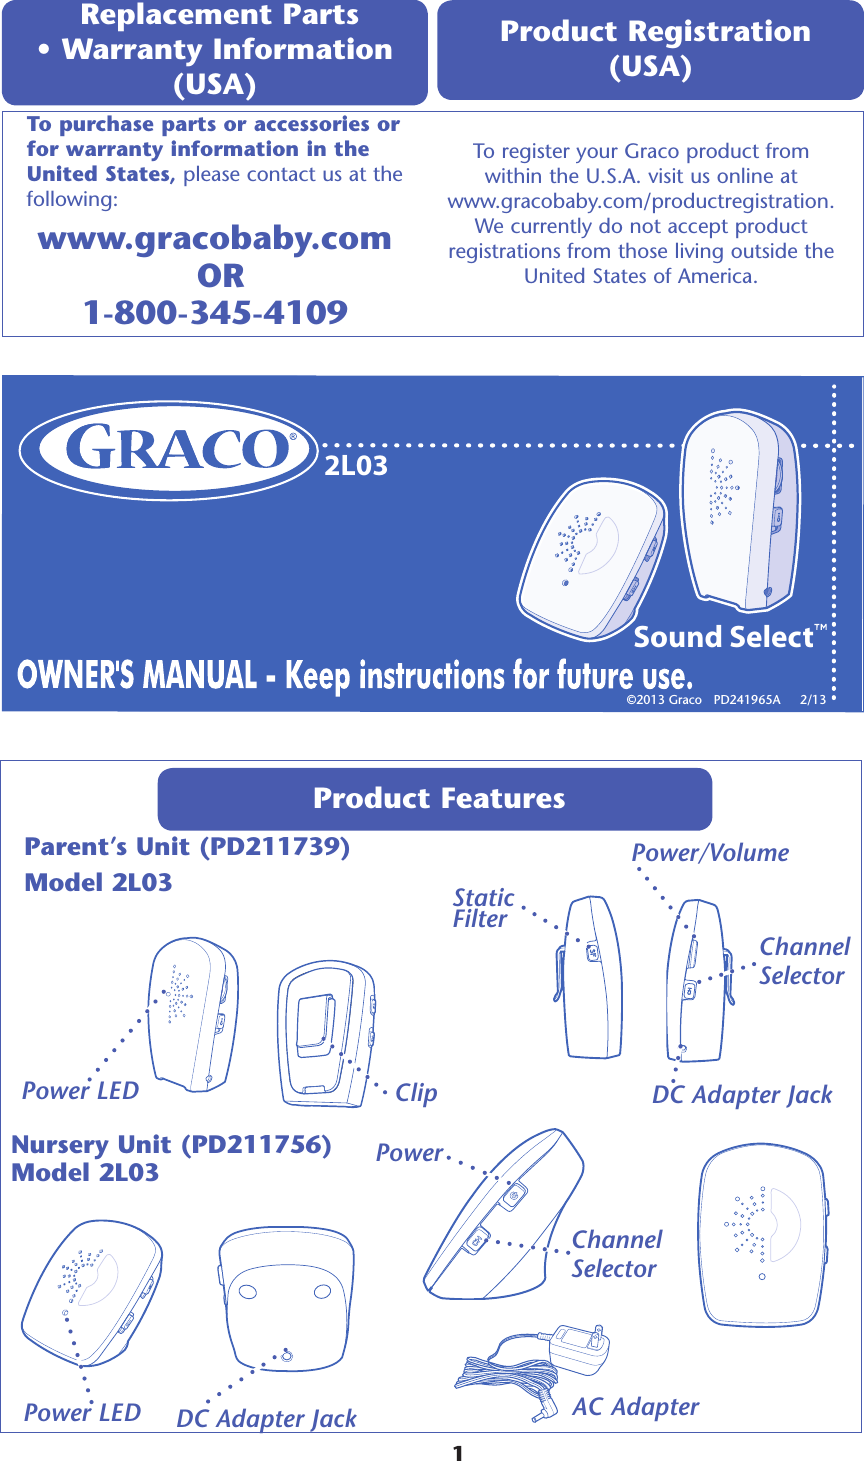 2L03Sound SelectProduct Features Parent’s Unit (PD211739)Model 2L03 Power Power/Volume Clip DC Adapter Jack AC Adapter Replacement Parts  • Warranty Information (USA) www.gracobaby.com   OR 1-800-345-4109To register your Graco product from  within the U.S.A. visit us online at  www.gracobaby.com/productregistration.  We currently do not accept product  registrations from those living outside the  United States of America. Product Registration (USA) To purchase parts or accessories or for warranty information in the United States, please contact us at the following:©2013 Graco   PD241965A     2/13  Channel  SelectorNursery Unit (PD211756) Model 2L03     1DC Adapter Jack Channel  SelectorStatic FilterPower LEDPower LED